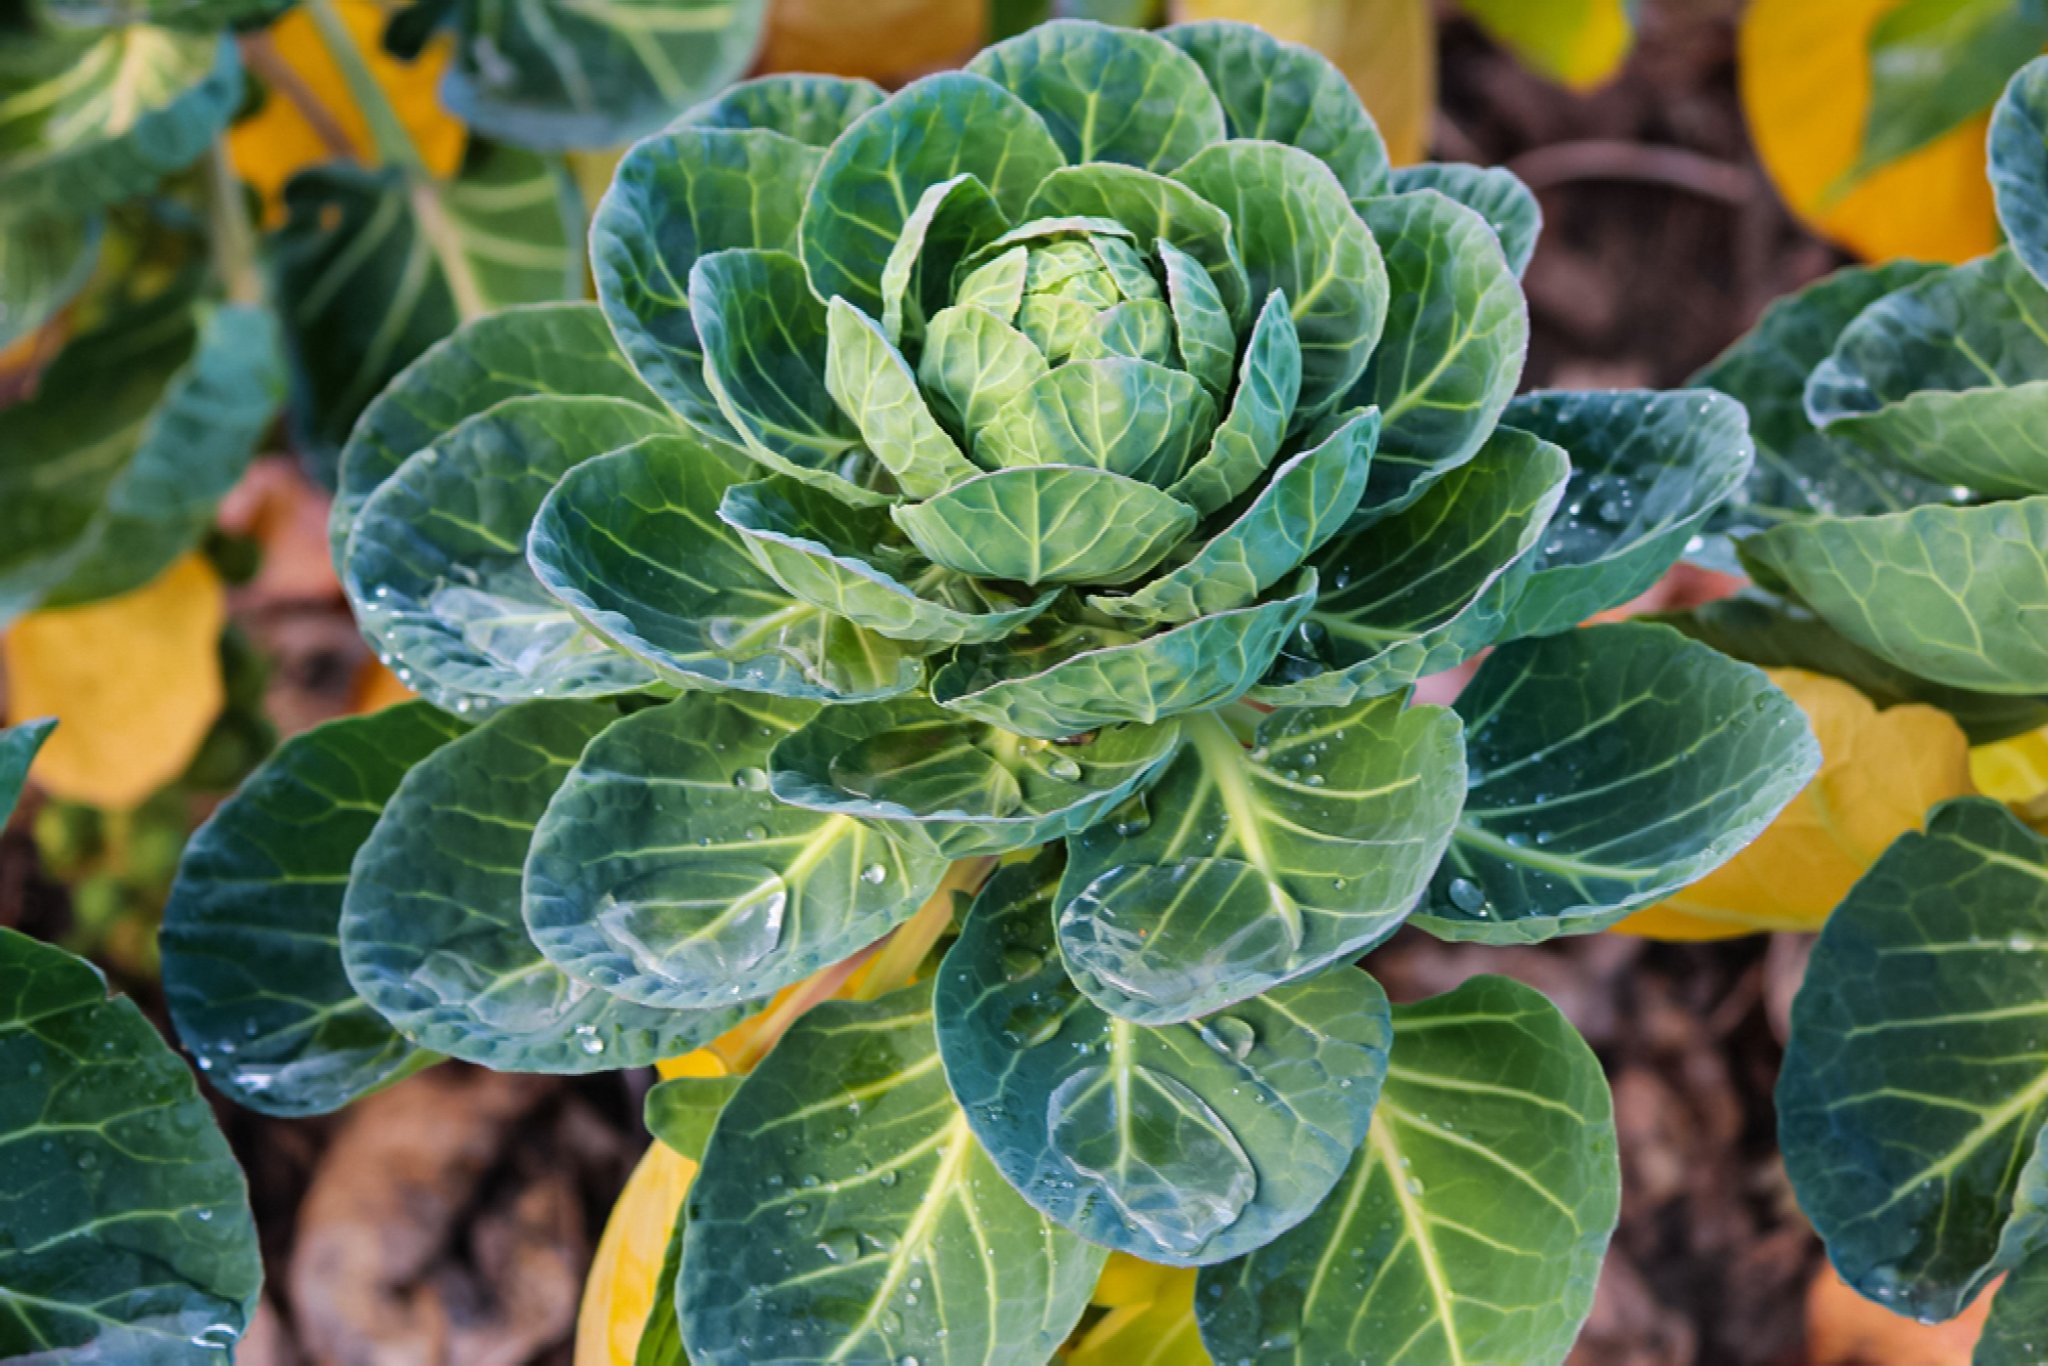 How to Grow and Care for Brussels Sprouts